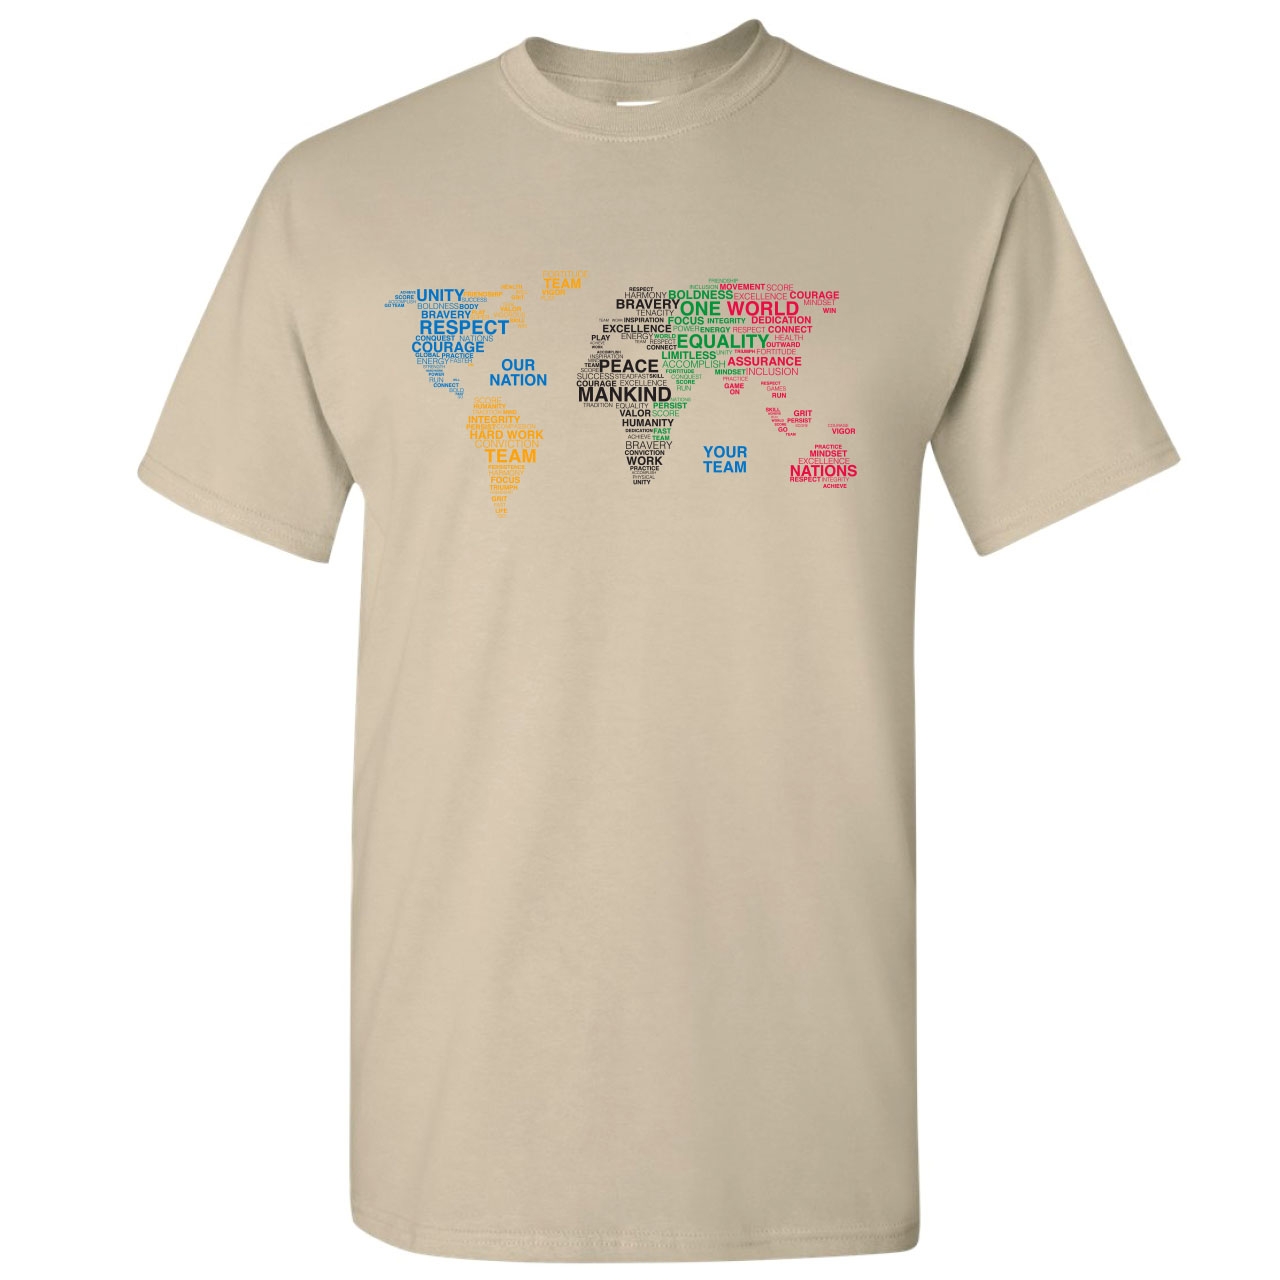 PARADE OF NATIONS CUSTOM ADULT T-SHIRT SAND